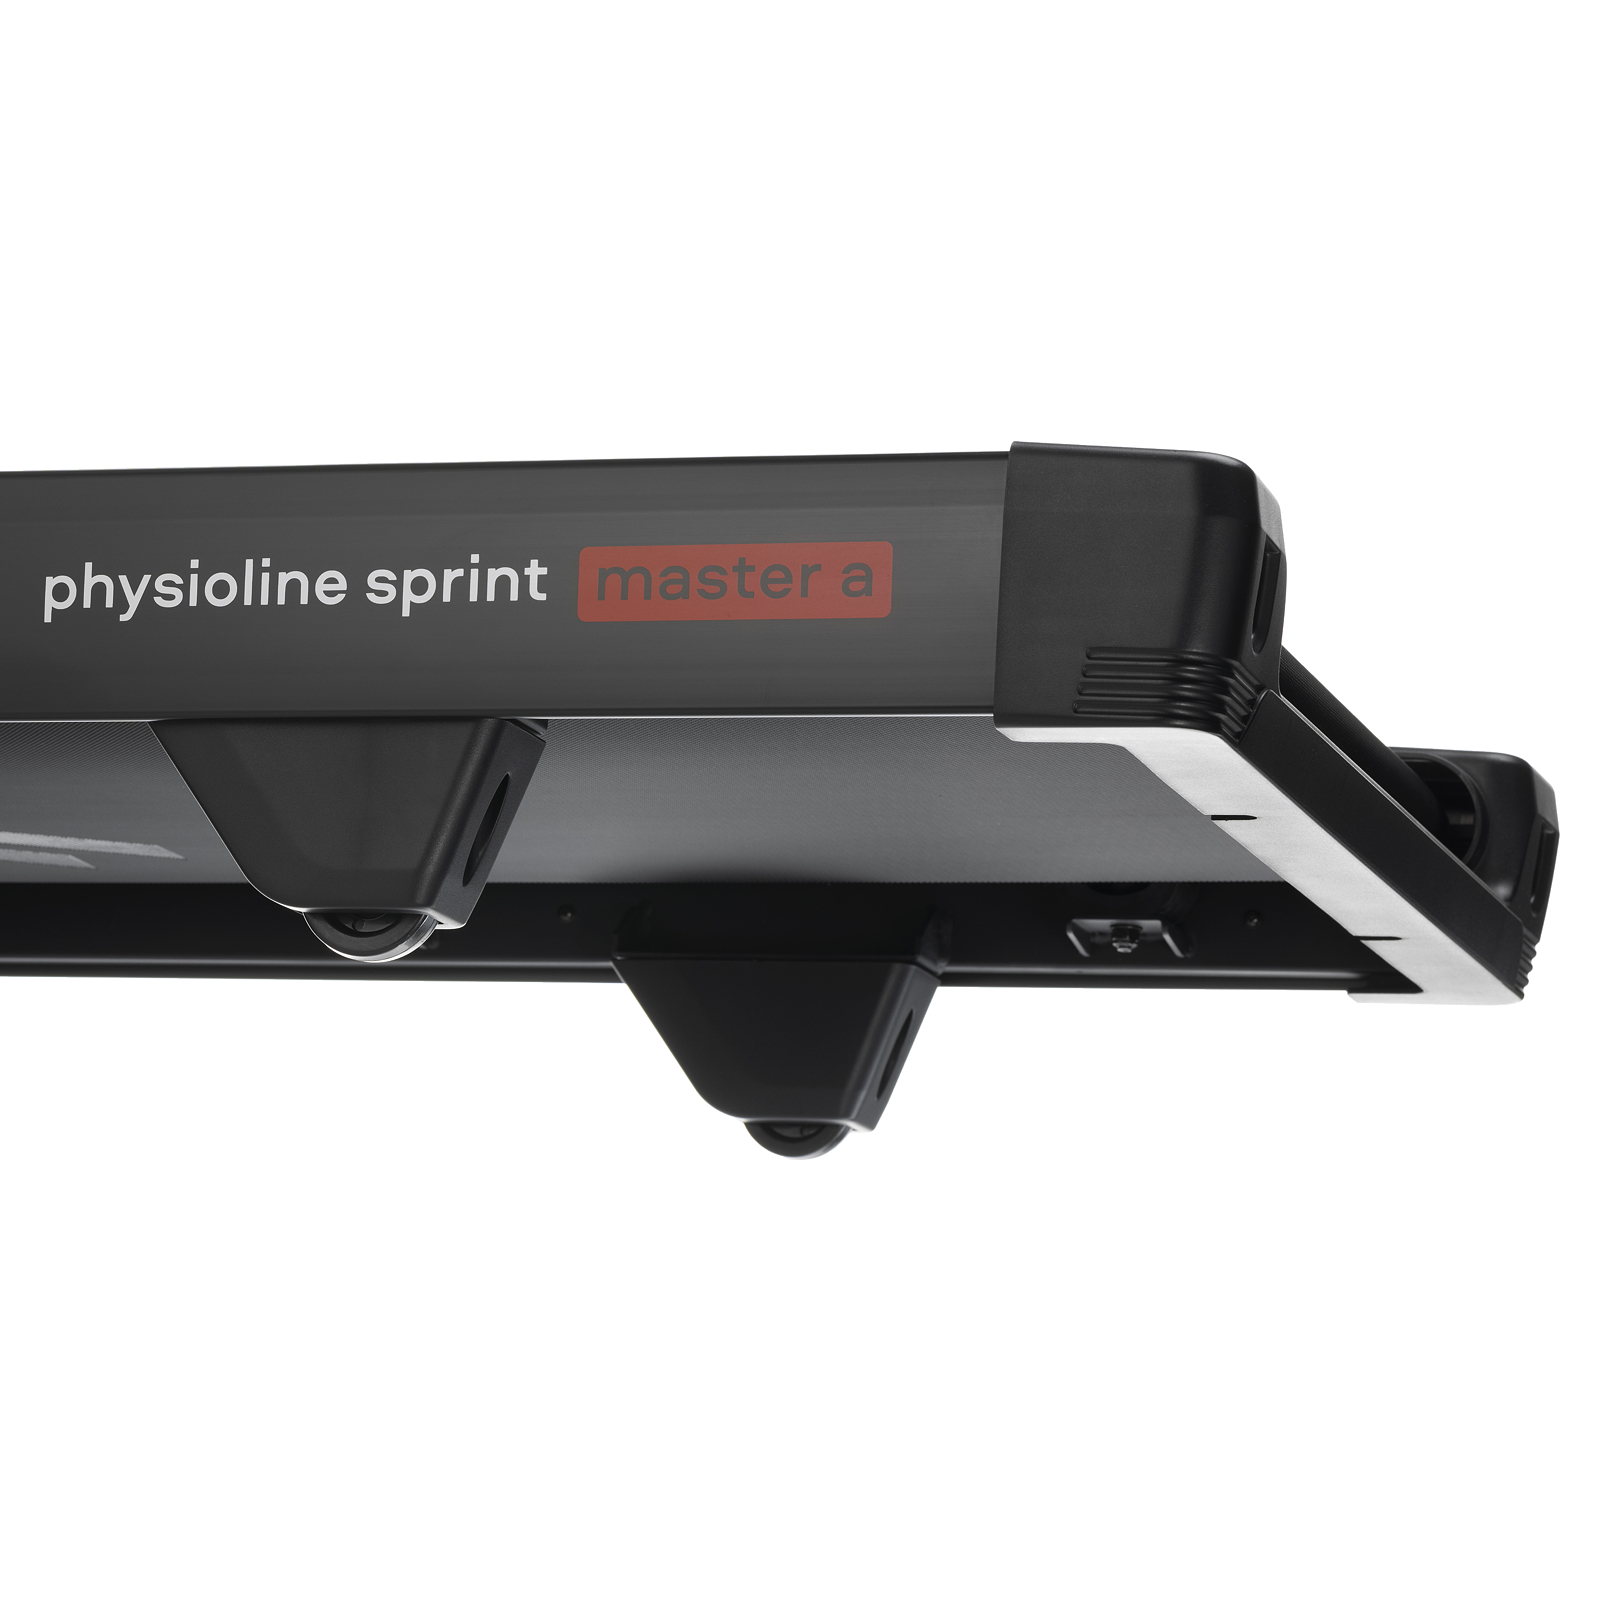 SVENSSON BODY LABS PHYSIOLINE SPRINTMASTER A preview 11